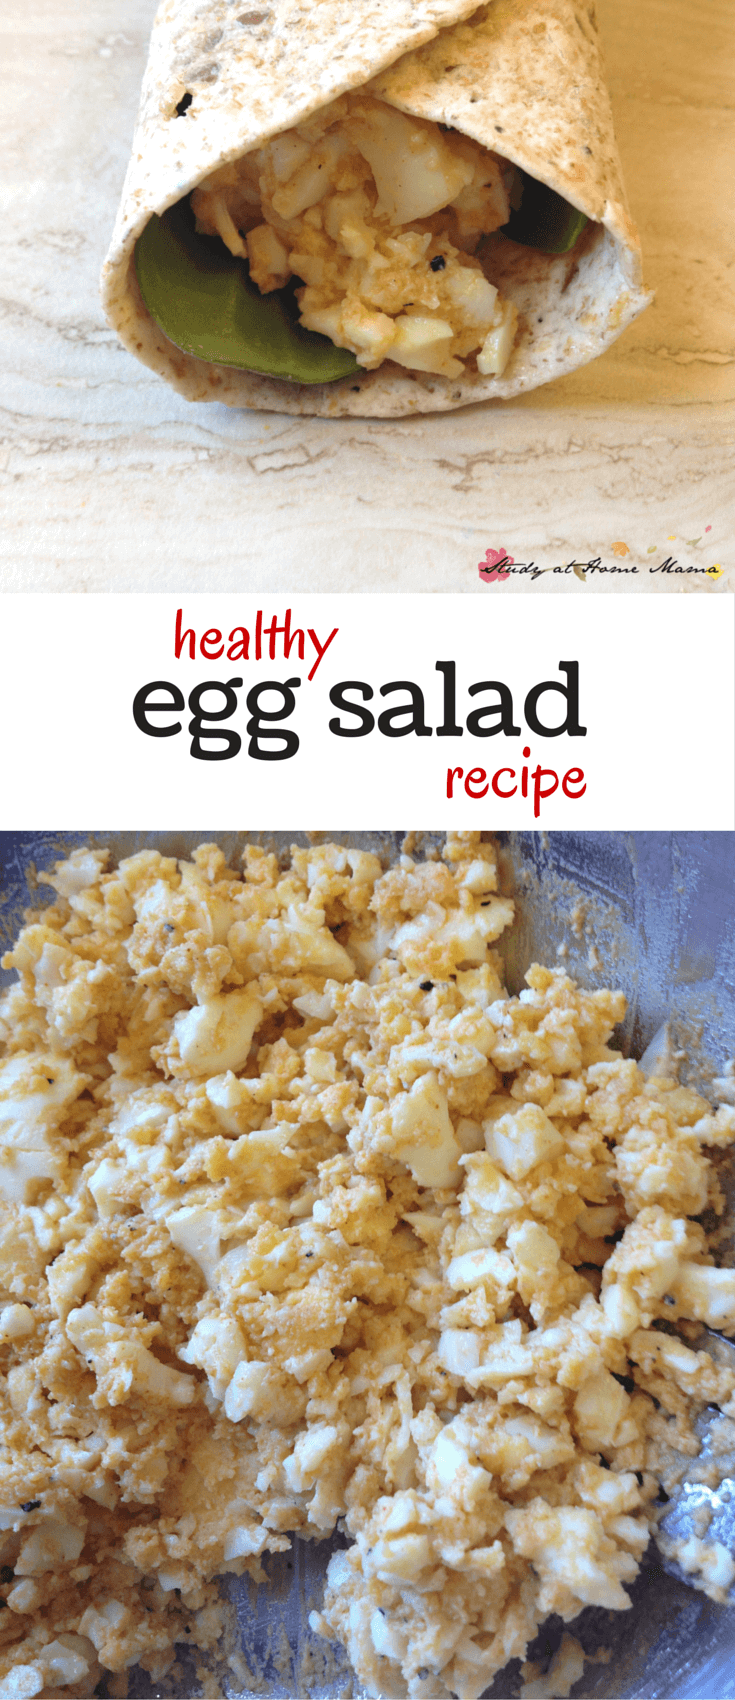 Easy healthy recipe for homemade egg salad - so easy, the kids can help make it! This recipe is mayo-free and packed with flavour